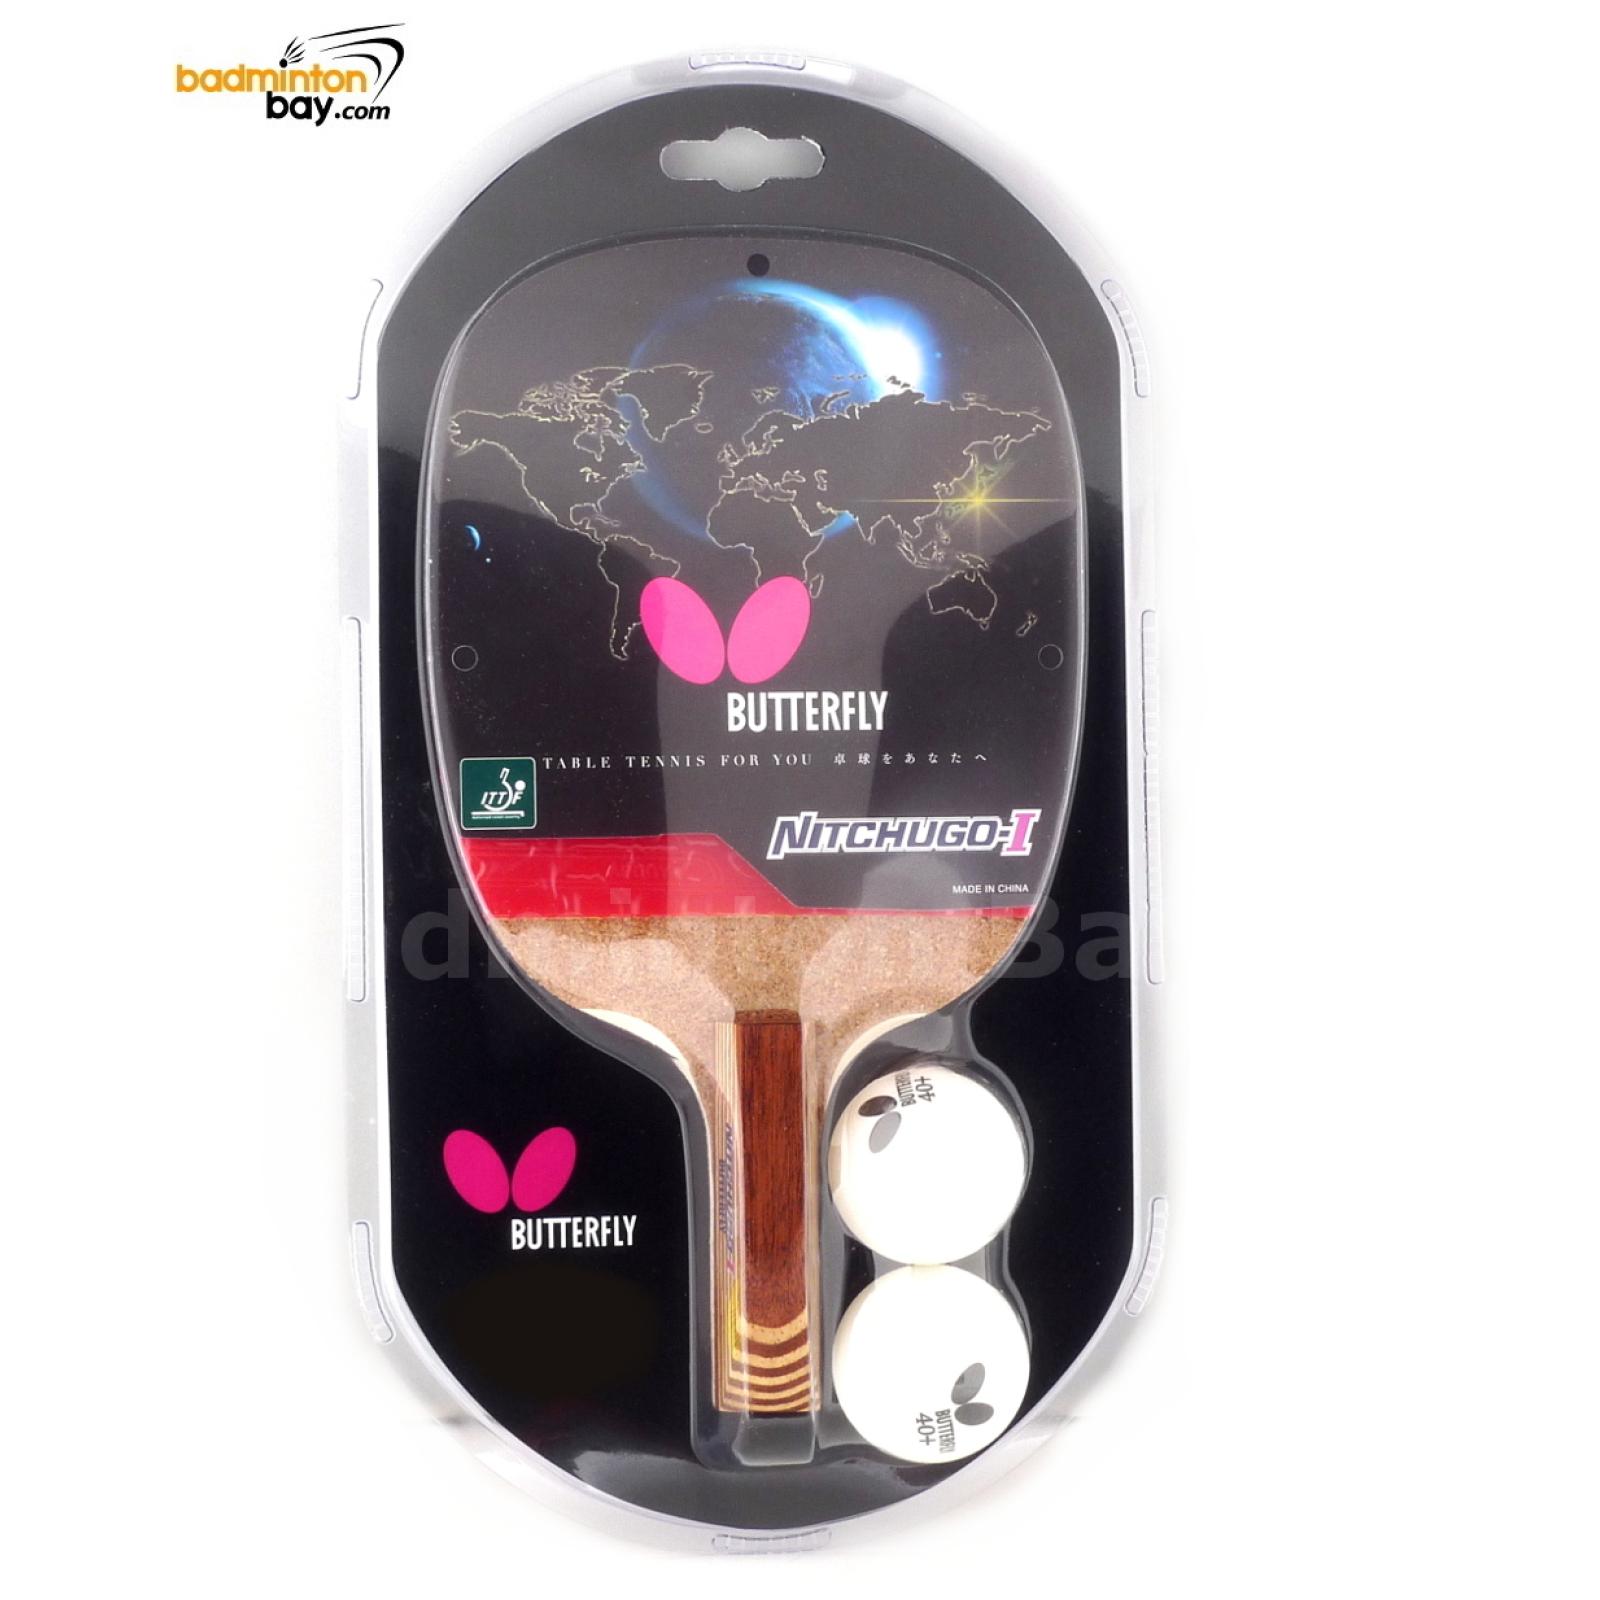 New with 2 balls Butterfly Table Tennis Rubber Racket Racket Shake Stay 1200 